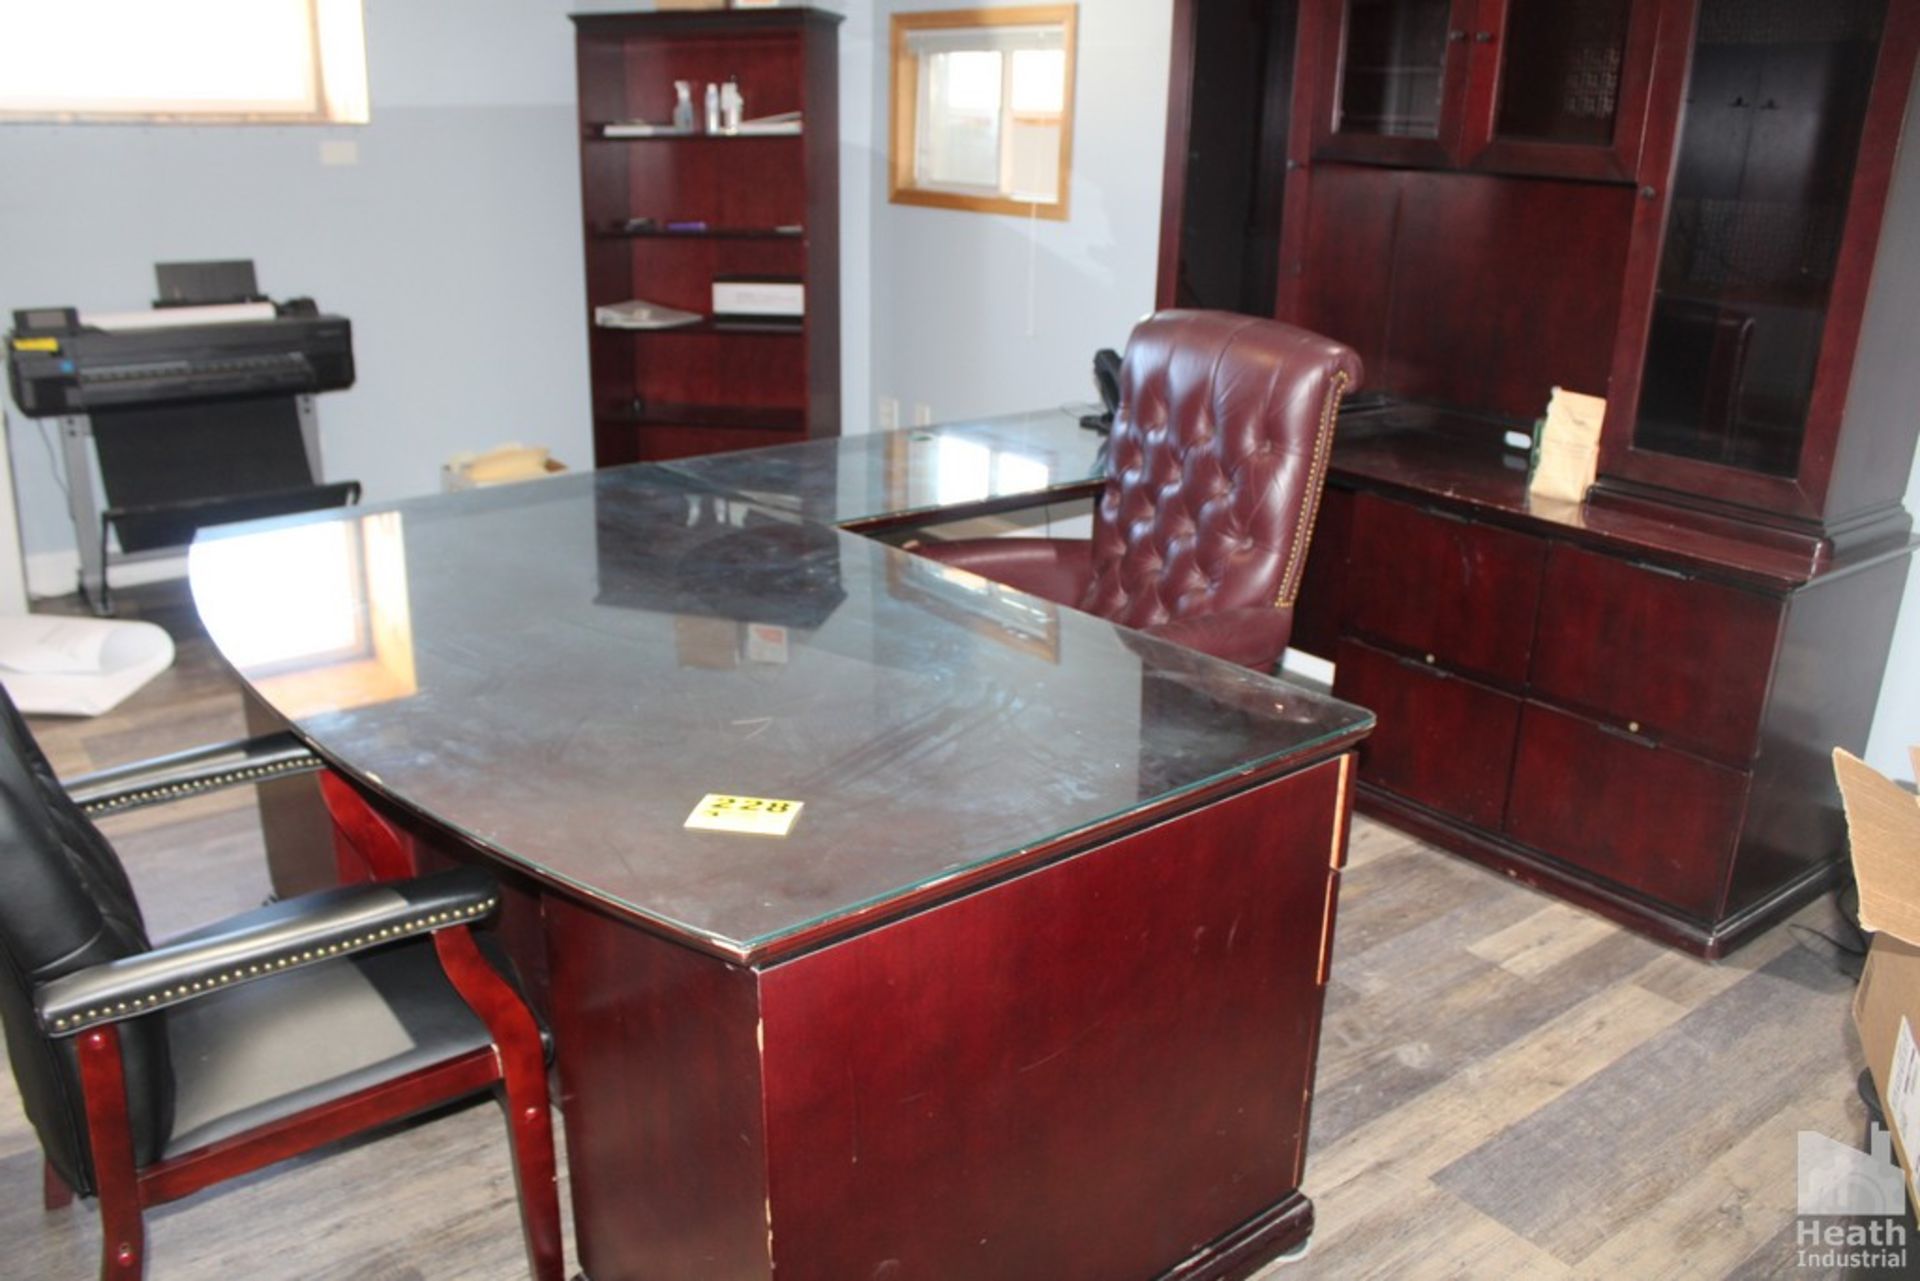 EXECUTIVE OFFICE WITH DESK, CREDENZA, CABINET, SHELF AND TWO CHAIRS - Image 4 of 4